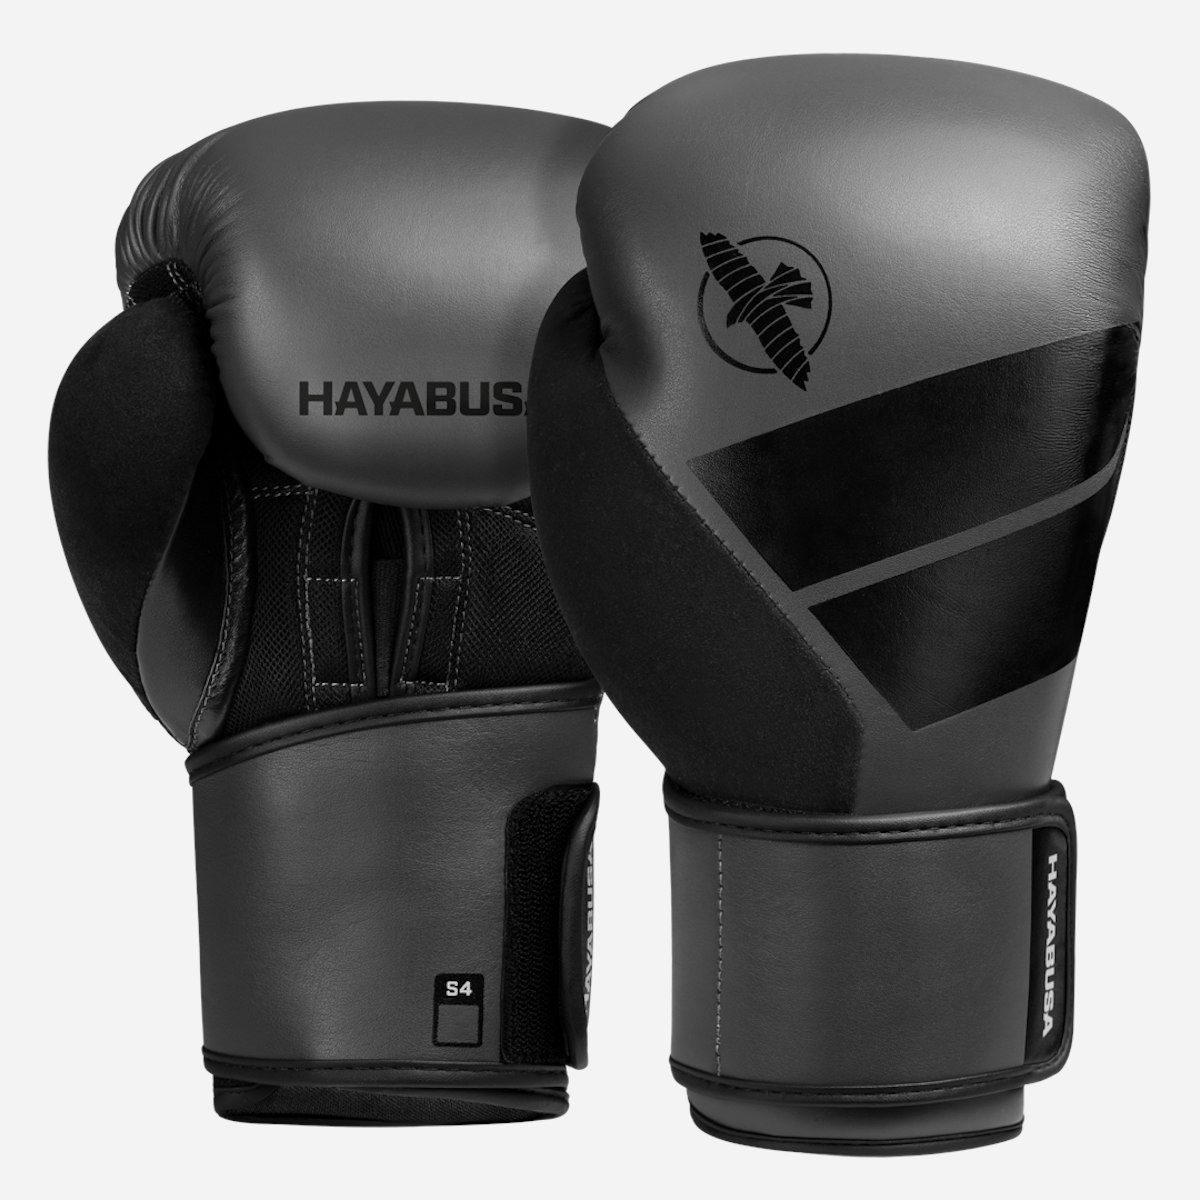 s4 boxing glove